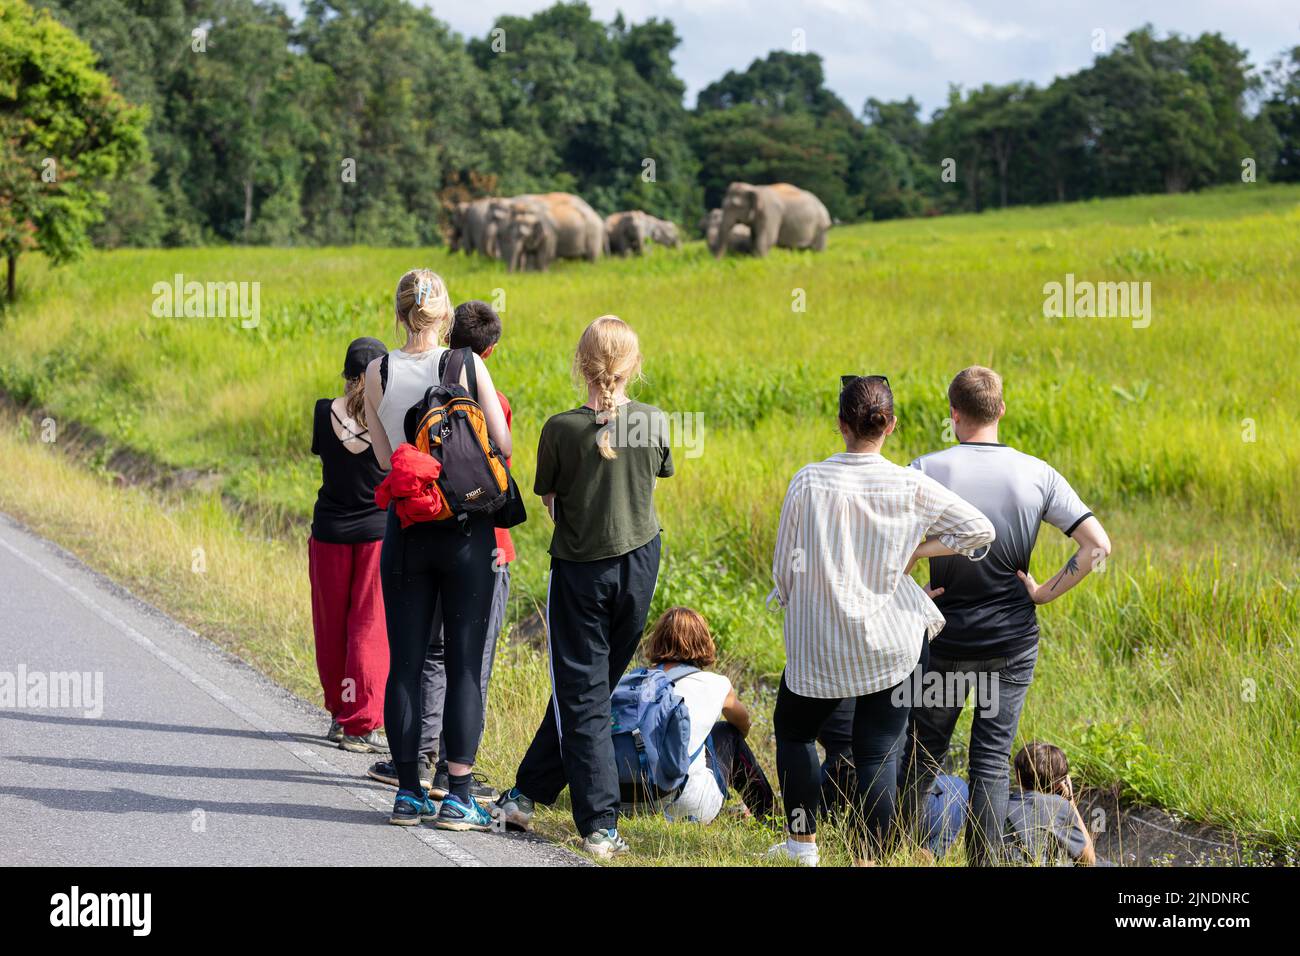 Khao yai, Thailand - June 28, 2022: Focusing on the back of tourist group while watching the wild elephants in blurry background on green grass field Stock Photo